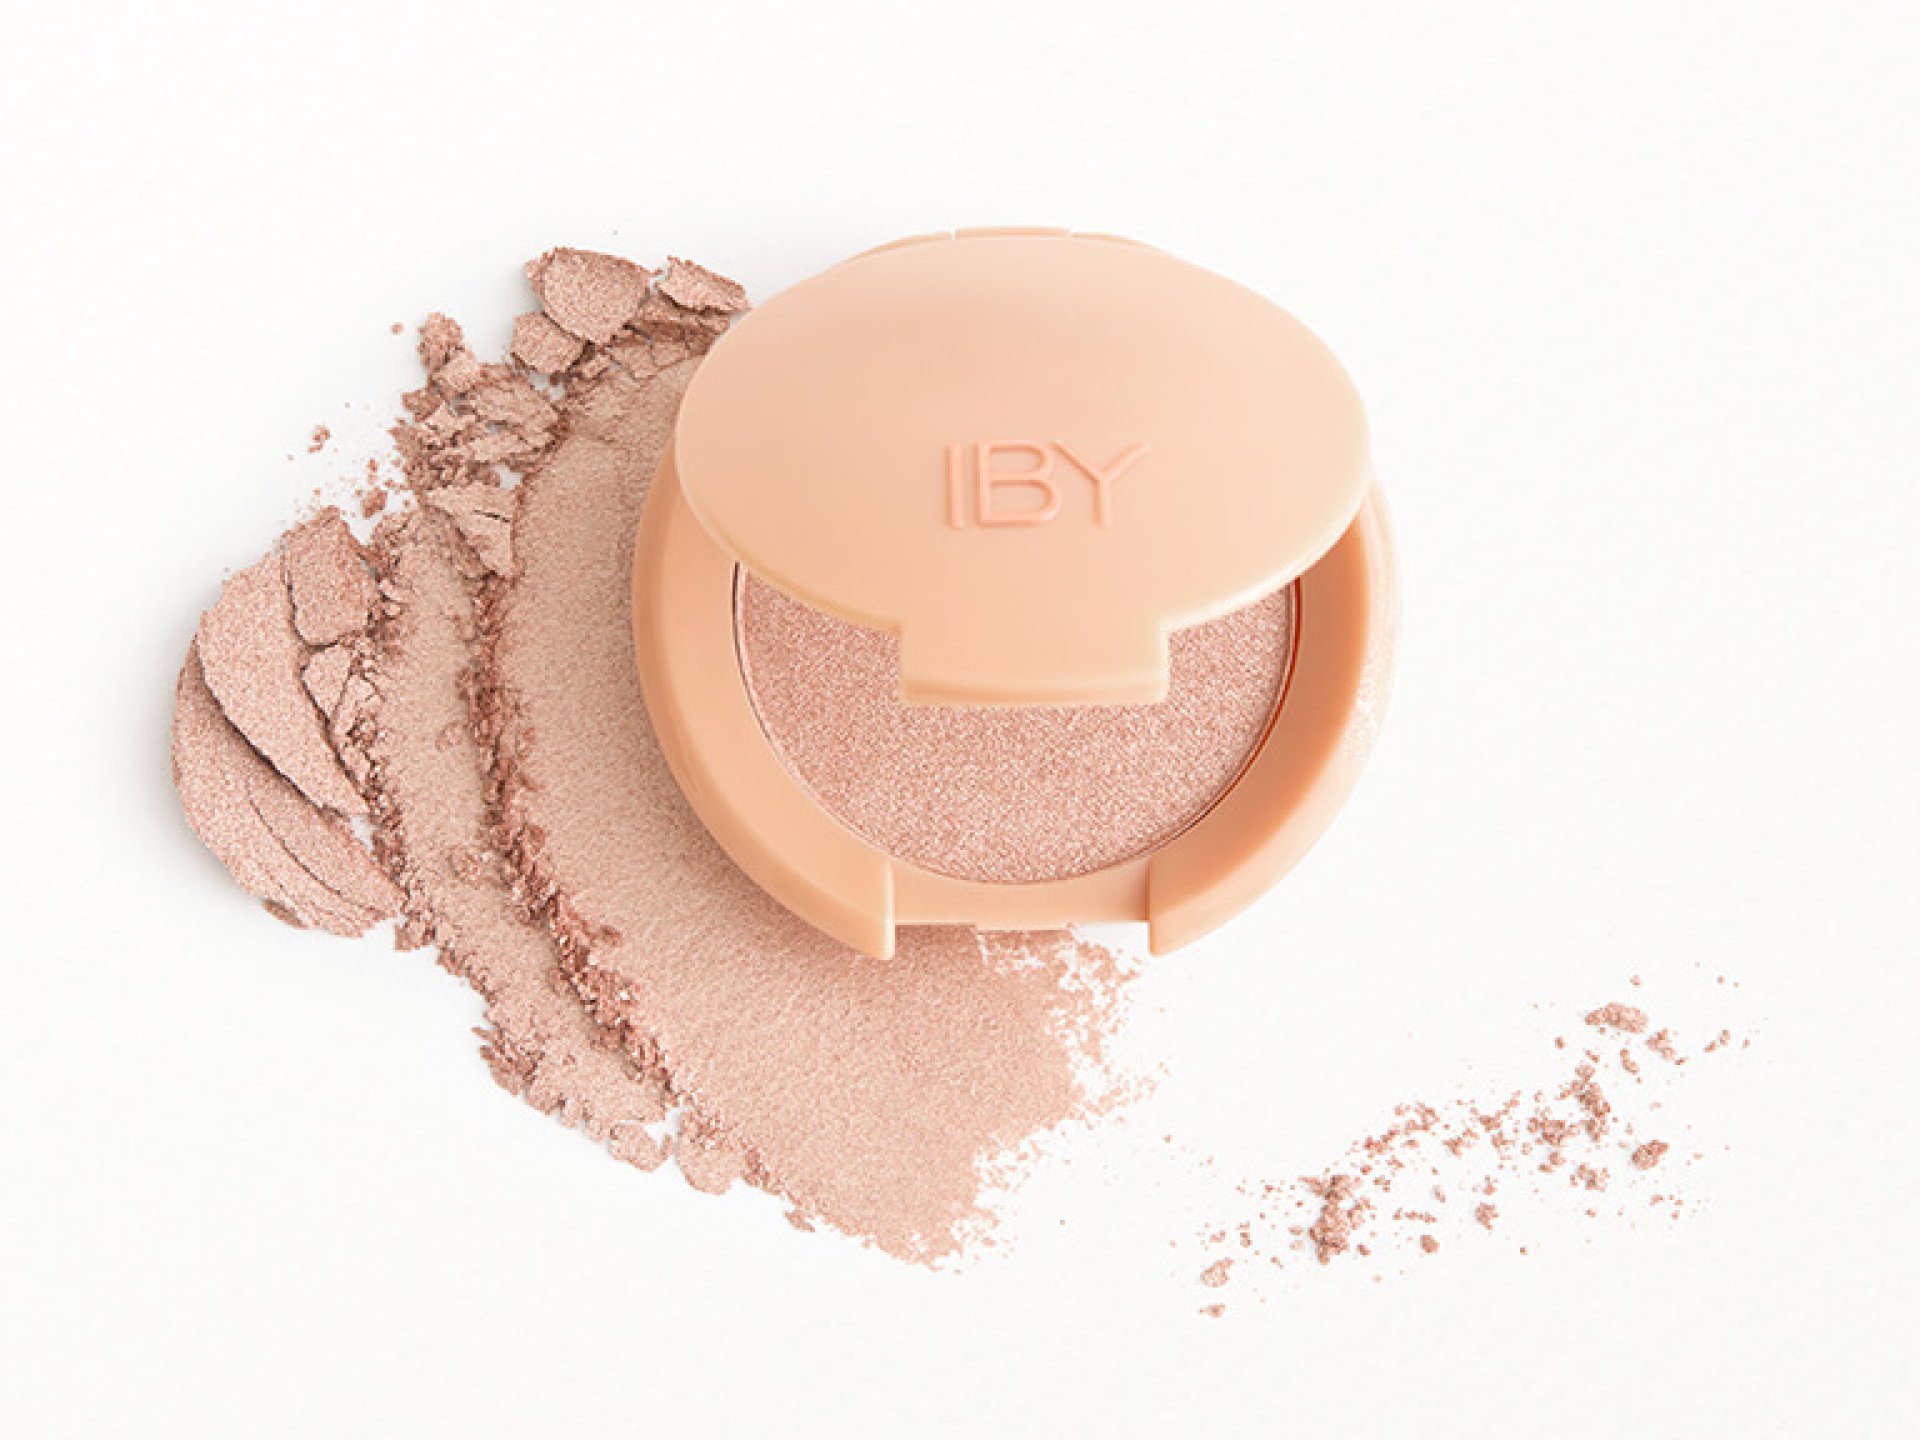 IBY BEAUTY Radiant Glow Highlighter in 24k Magic